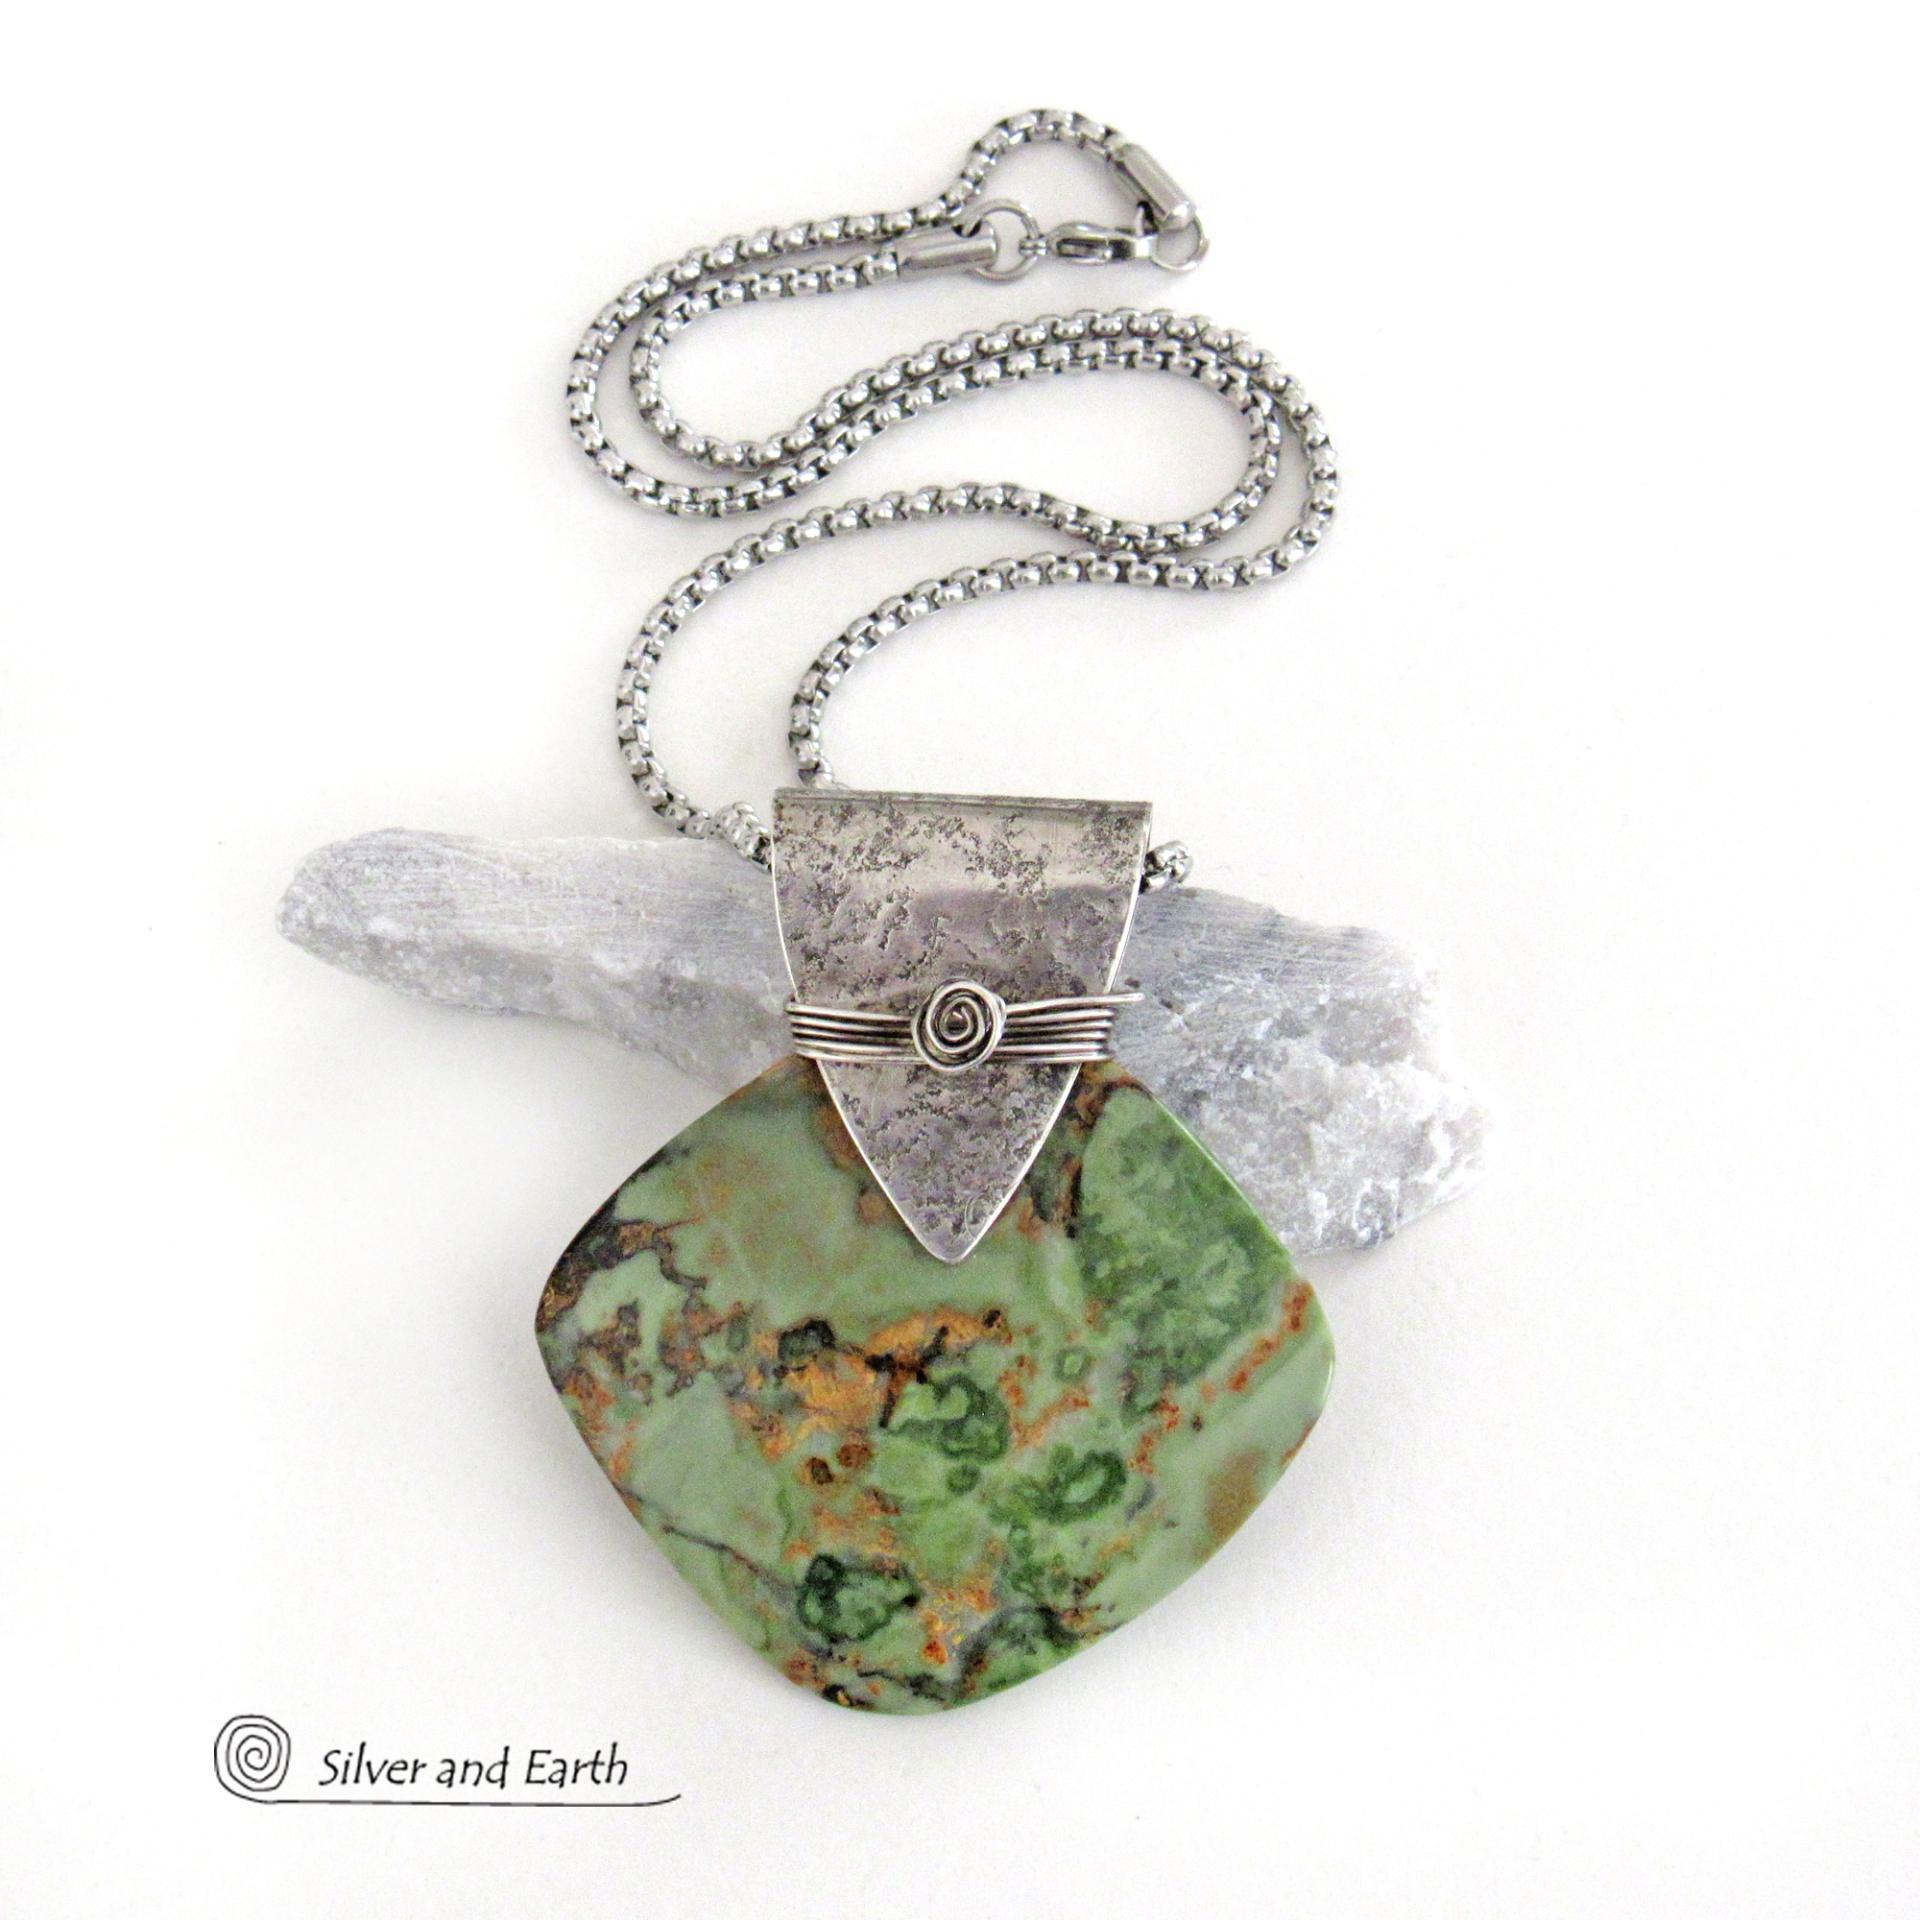 Green Rhyolite Jasper Sterling Silver Necklace - Handcrafted Unique One of a Kind Natural Stone Jewelry